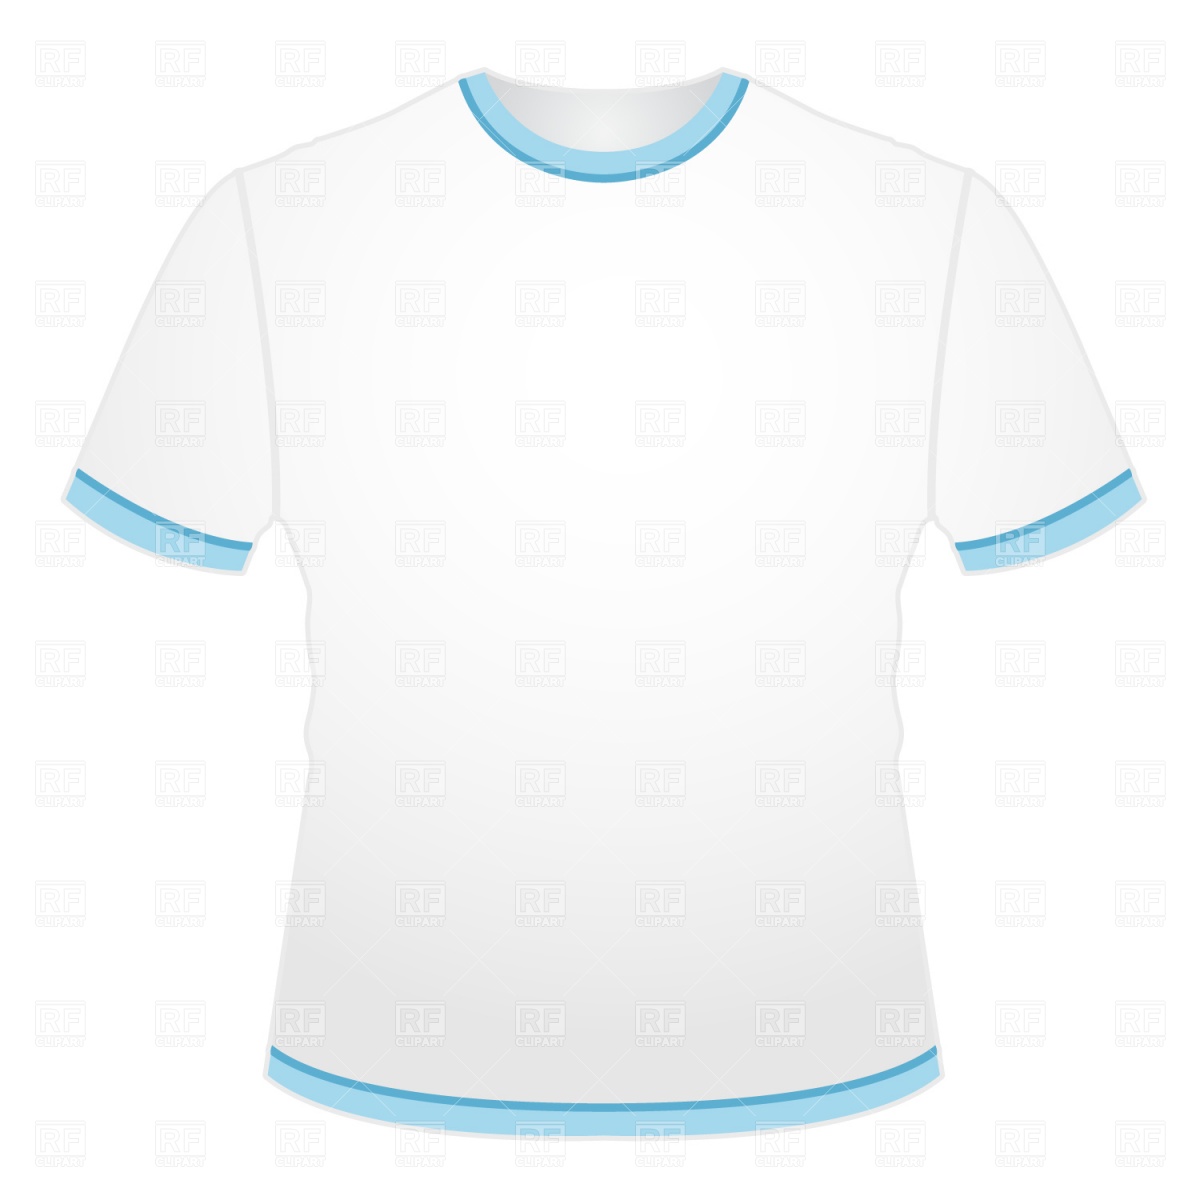 Blank T-Shirt Template Free Download